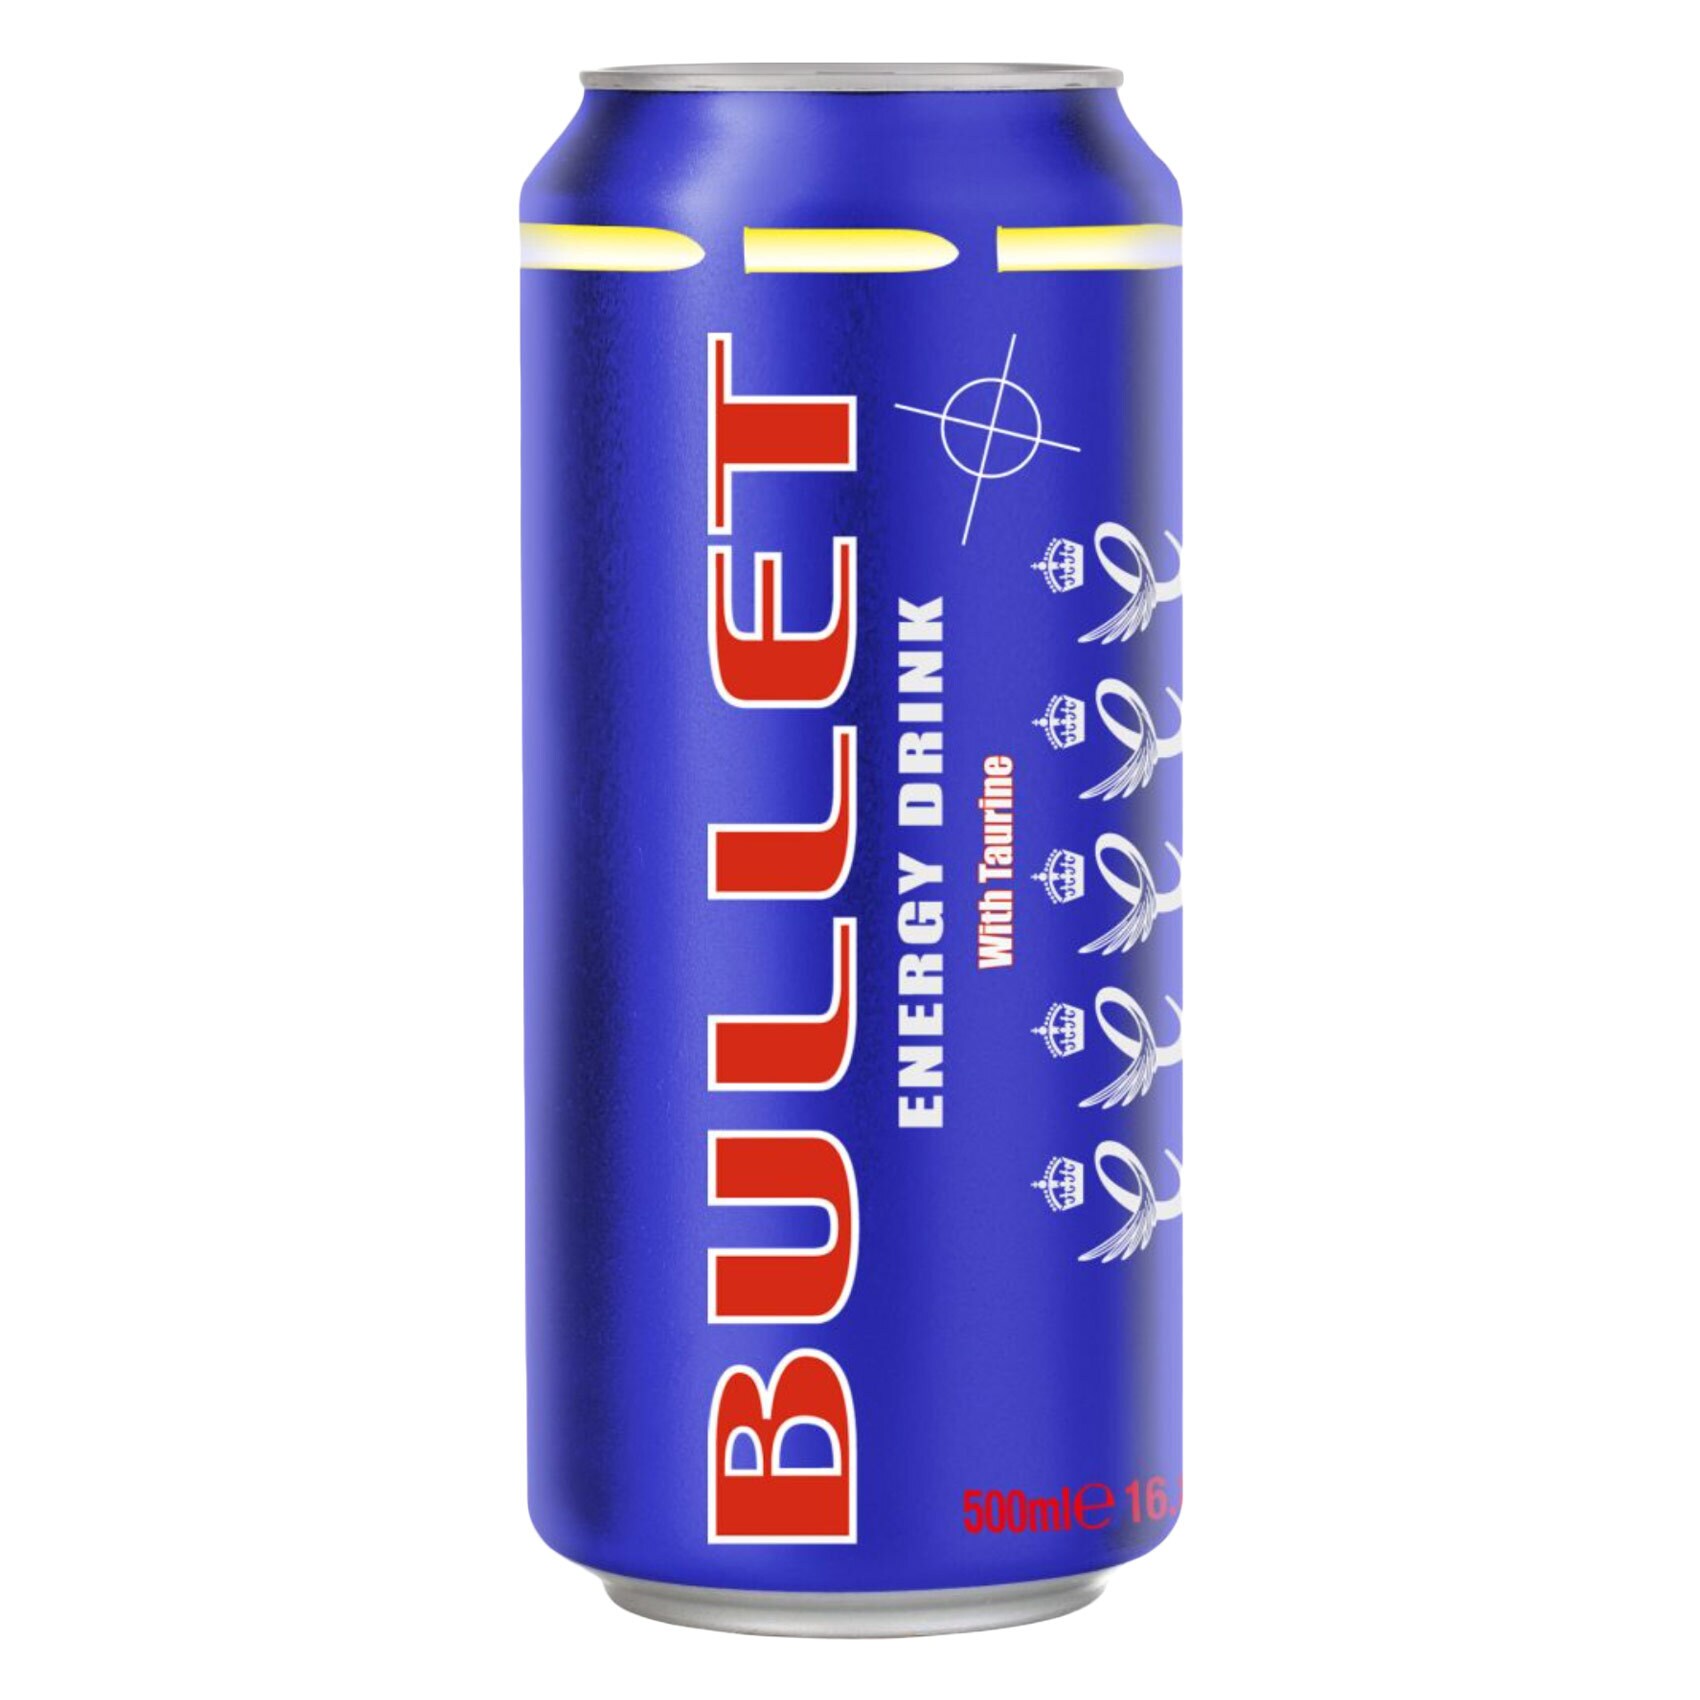 Why is there taurine in energy drinks?